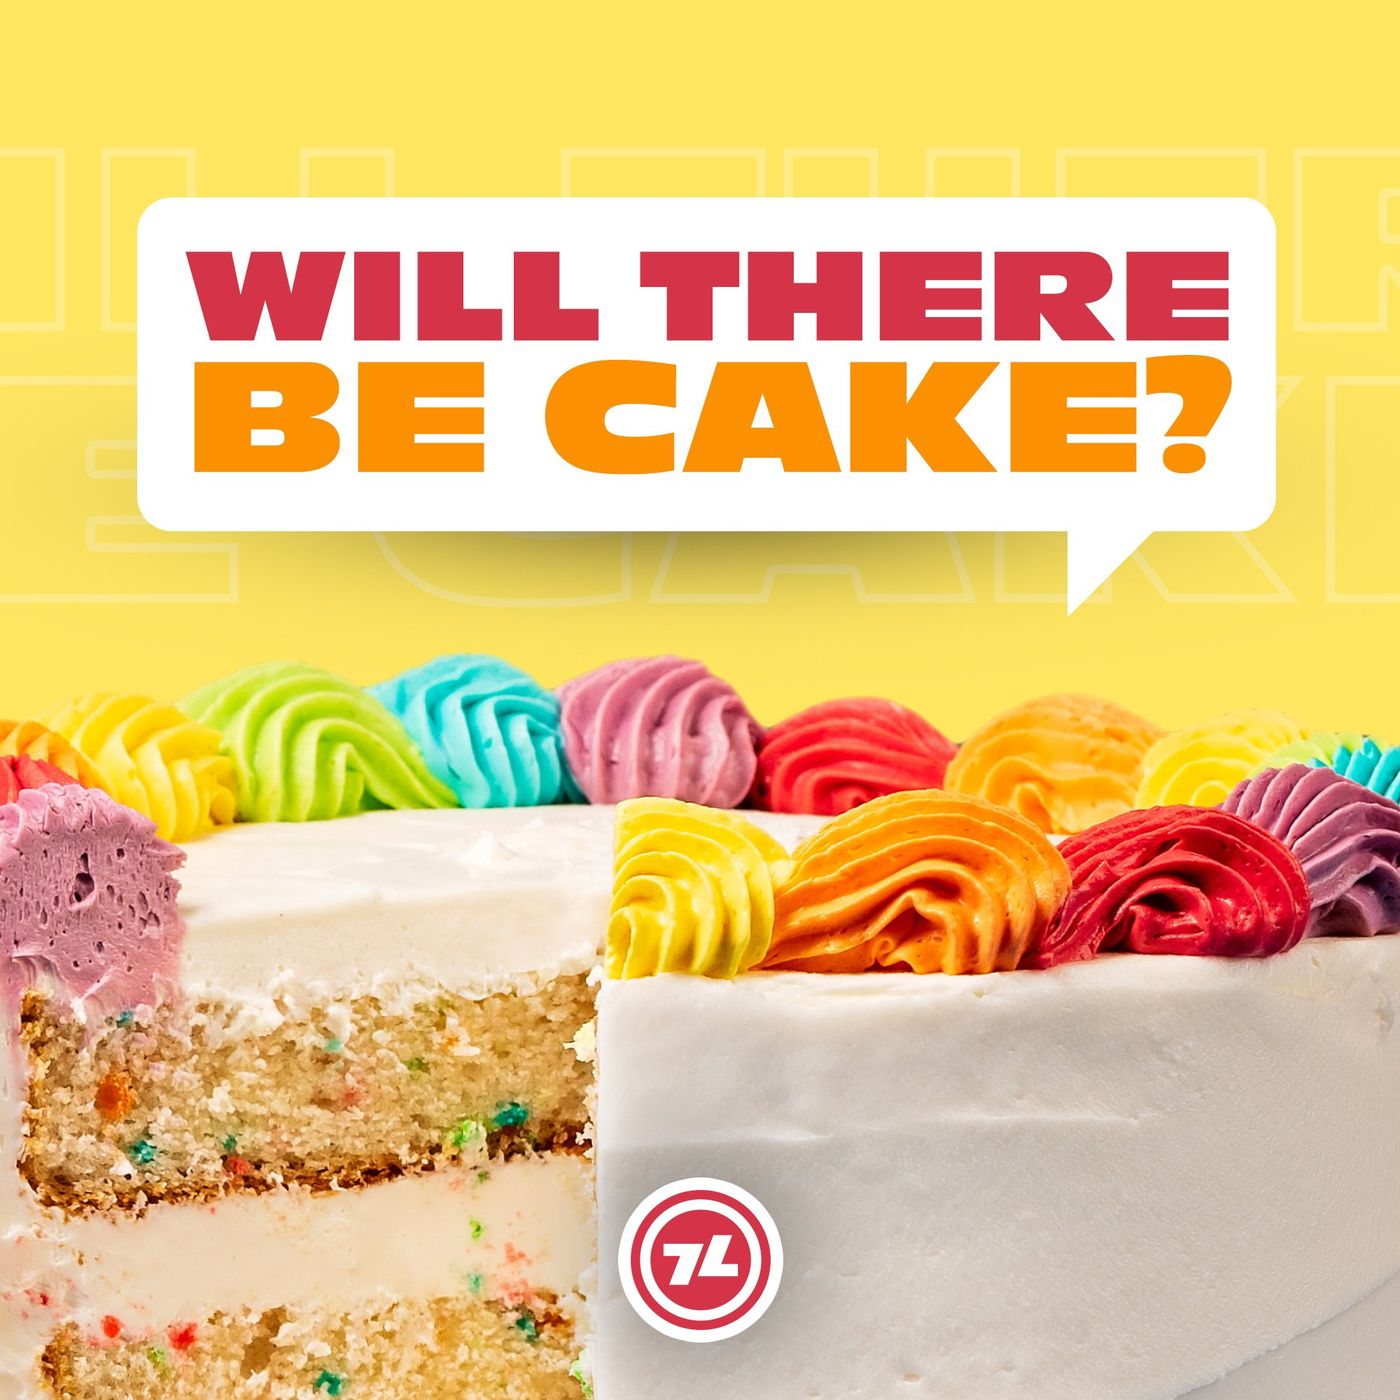 Will There Be Cake?